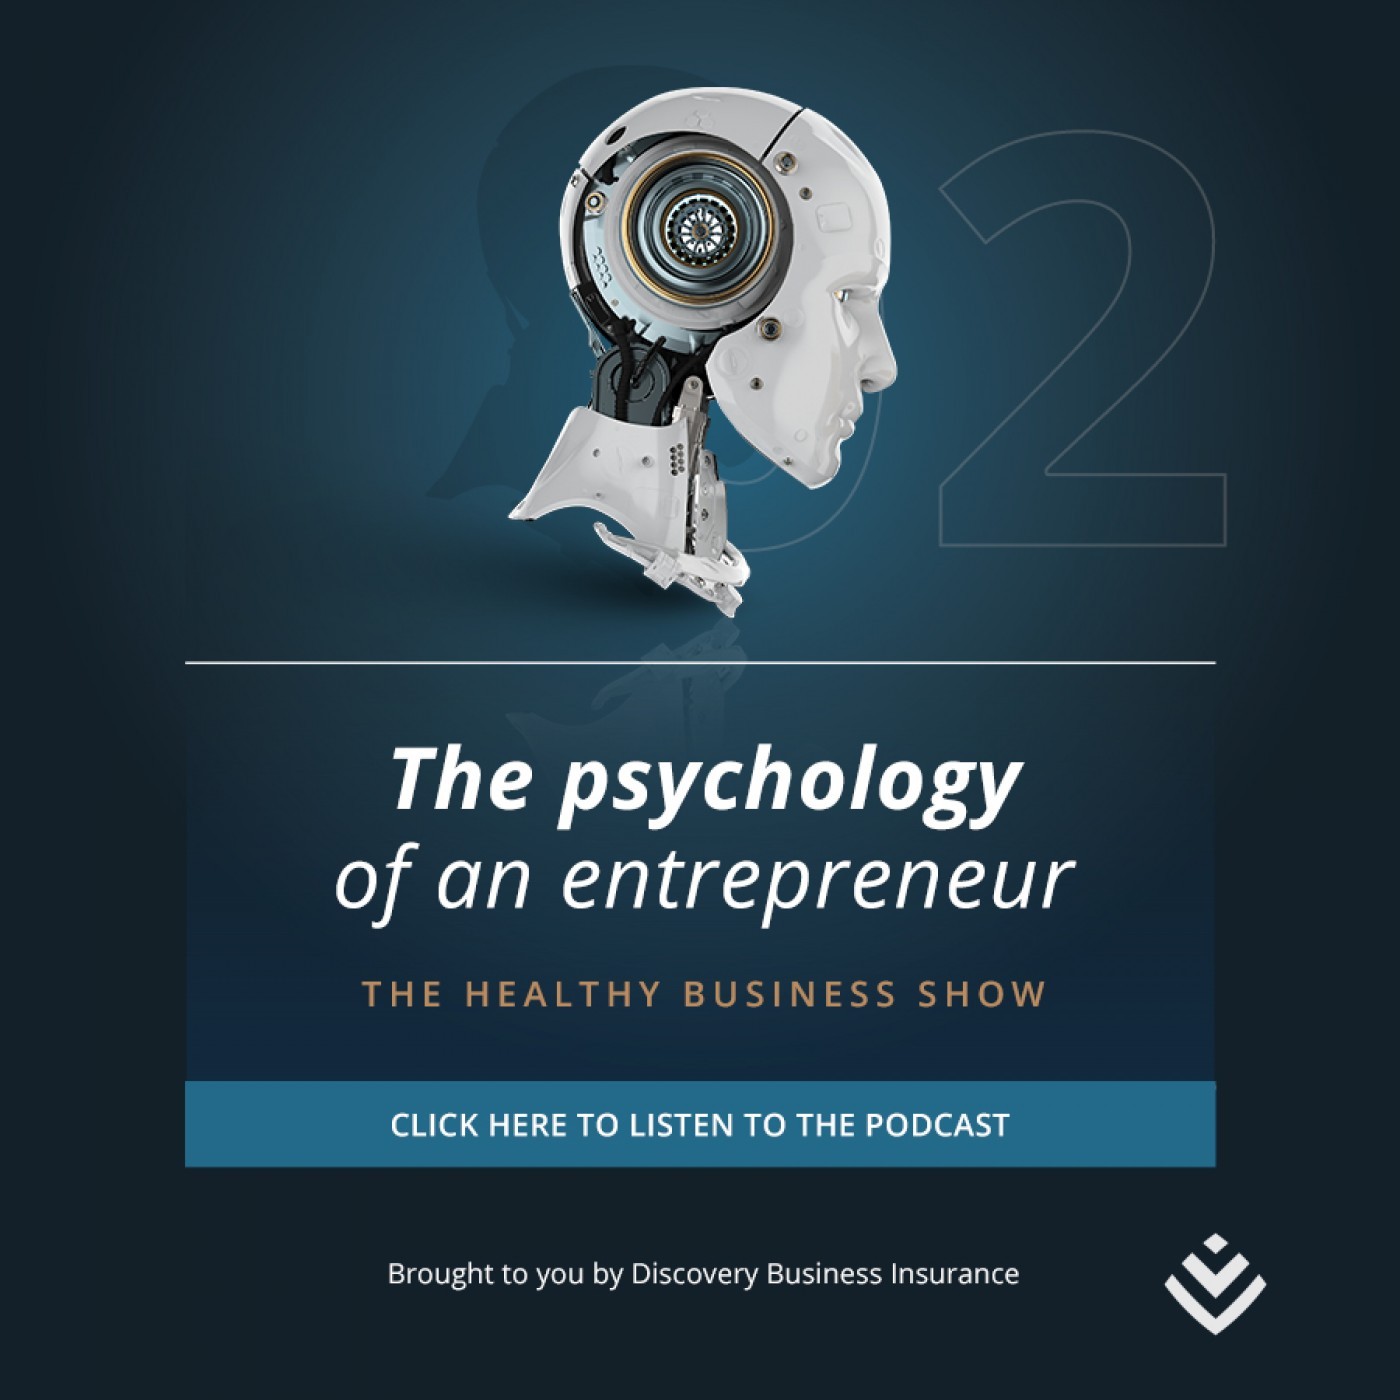 The Healthy Business Show: The psychology of an entrepreneur